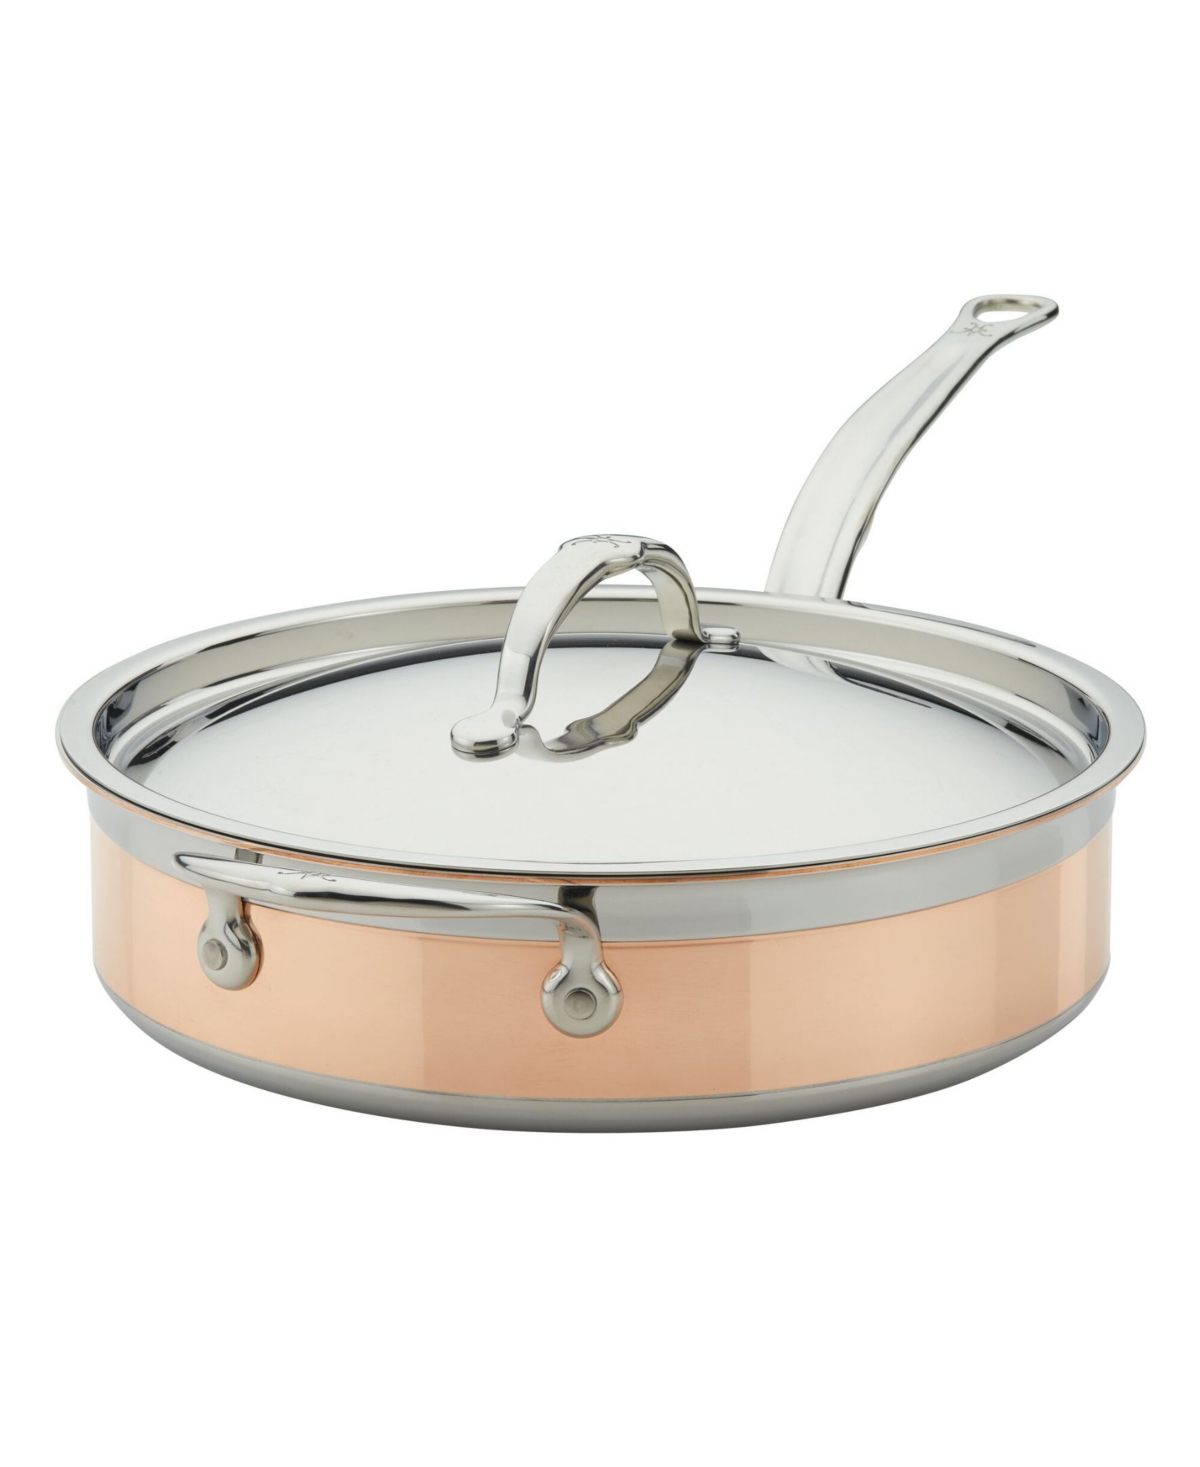 Hestan Copperbond Copper Induction 3.5-quart Covered Saute With Helper Handle